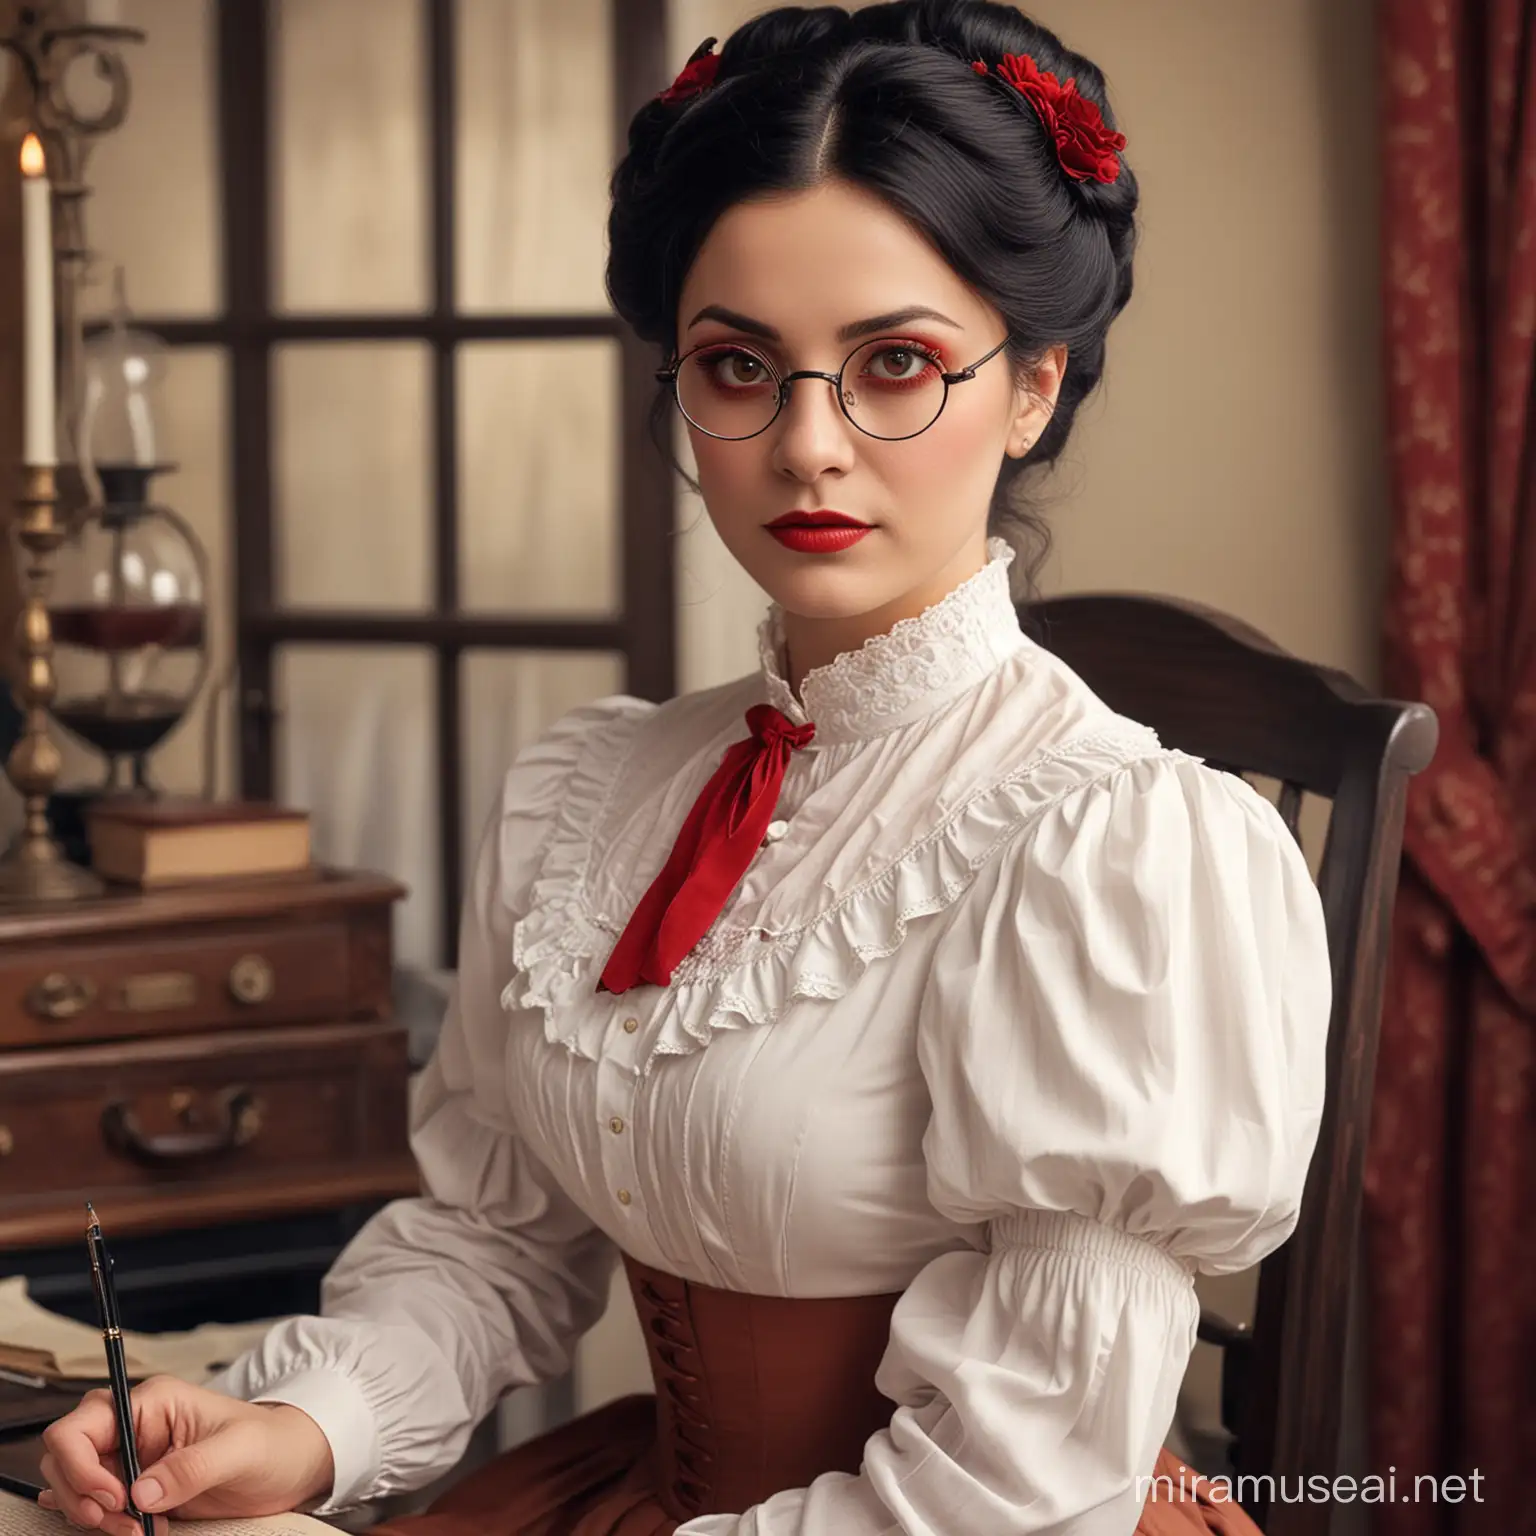 Victorian Lady with Red Eyes and HalfMoon Spectacles Examining as a Doctor